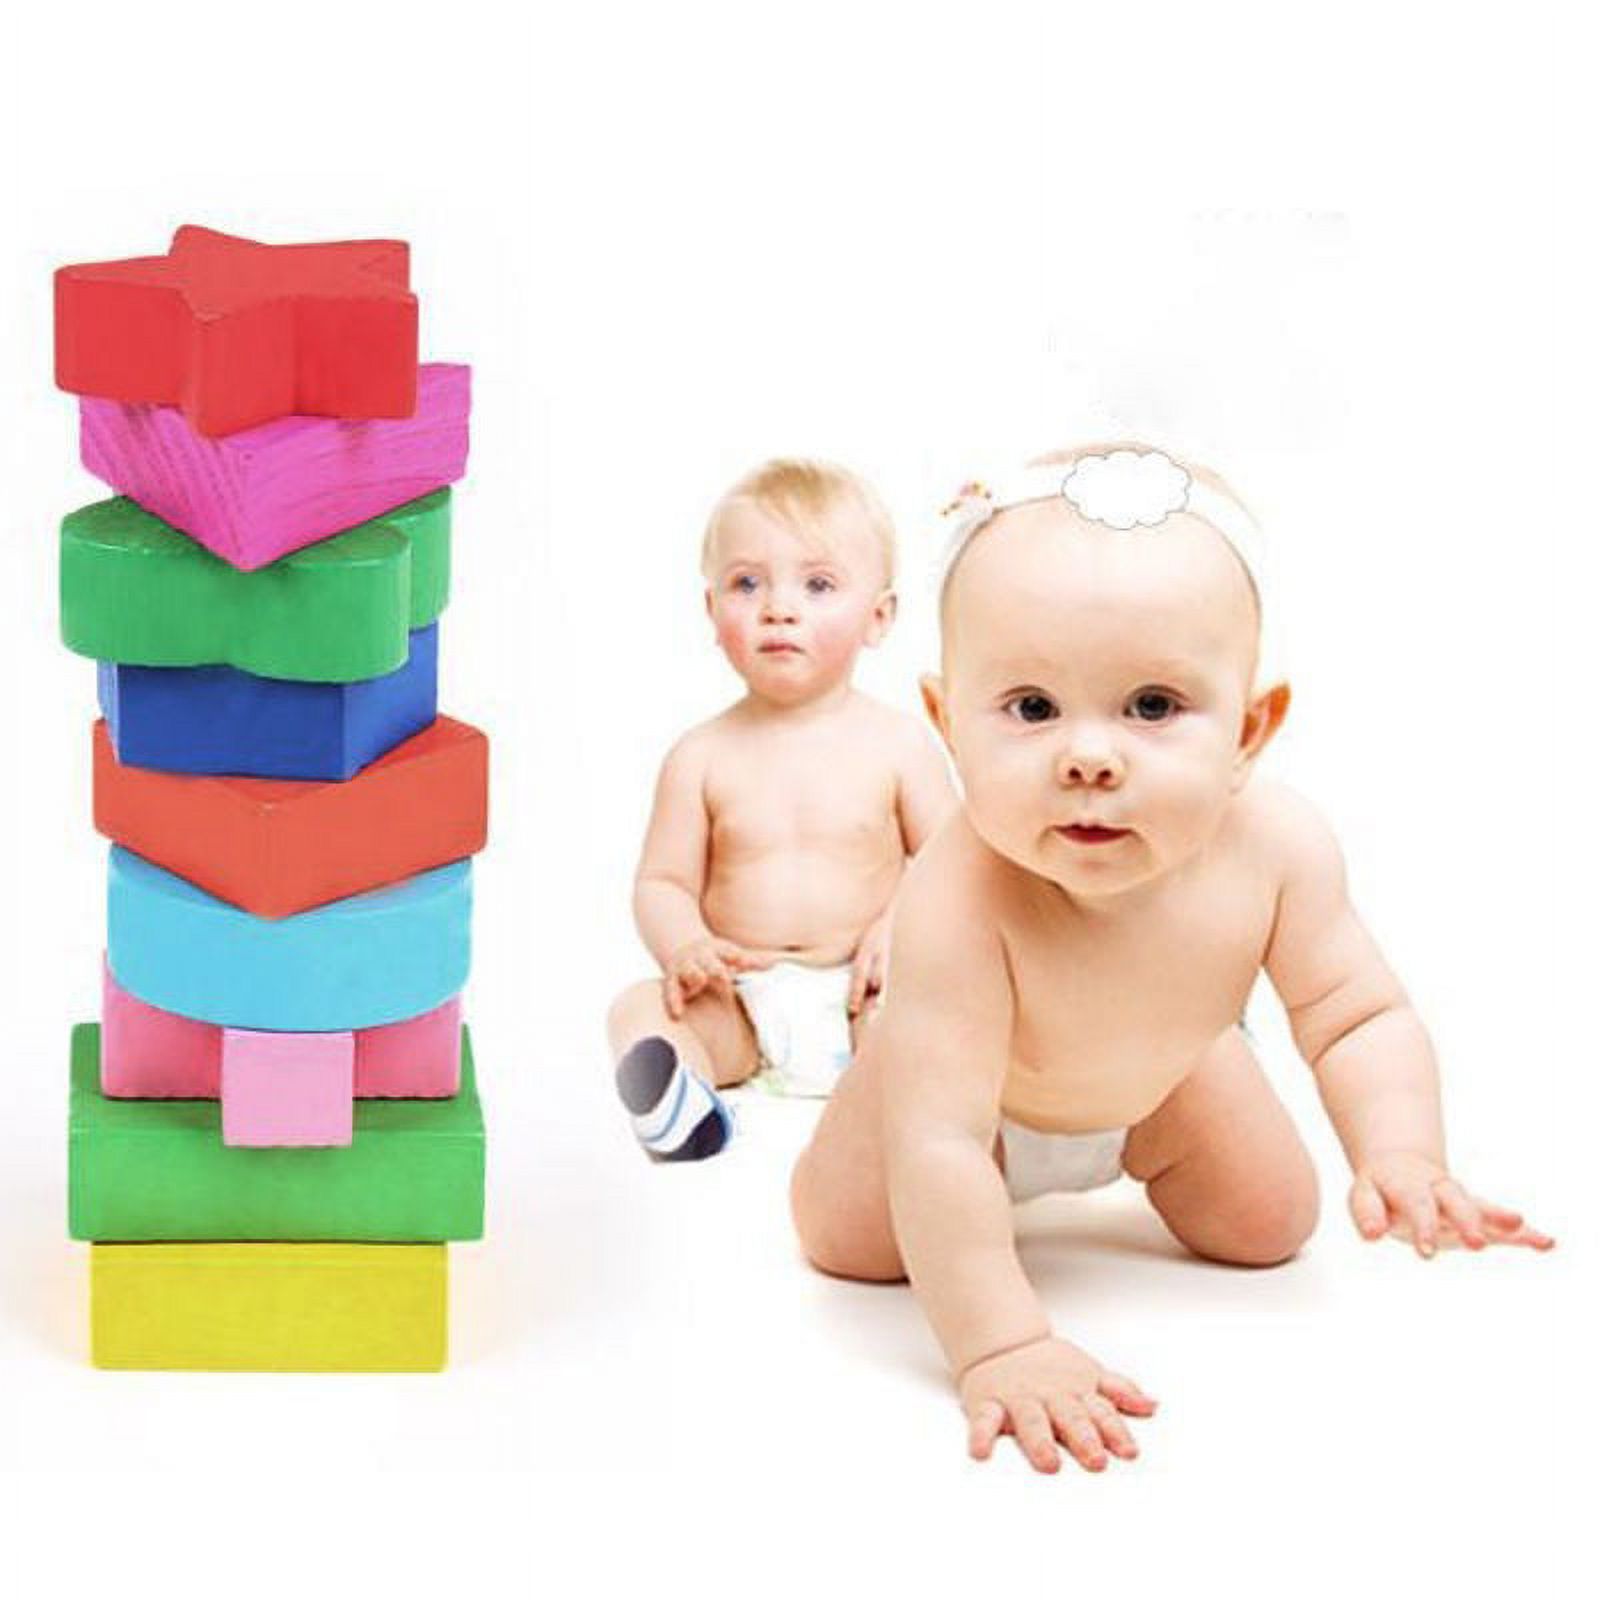 Kids Baby Wooden Geometry Block Puzzle Montessori Early Learning Educational Toy - image 5 of 5